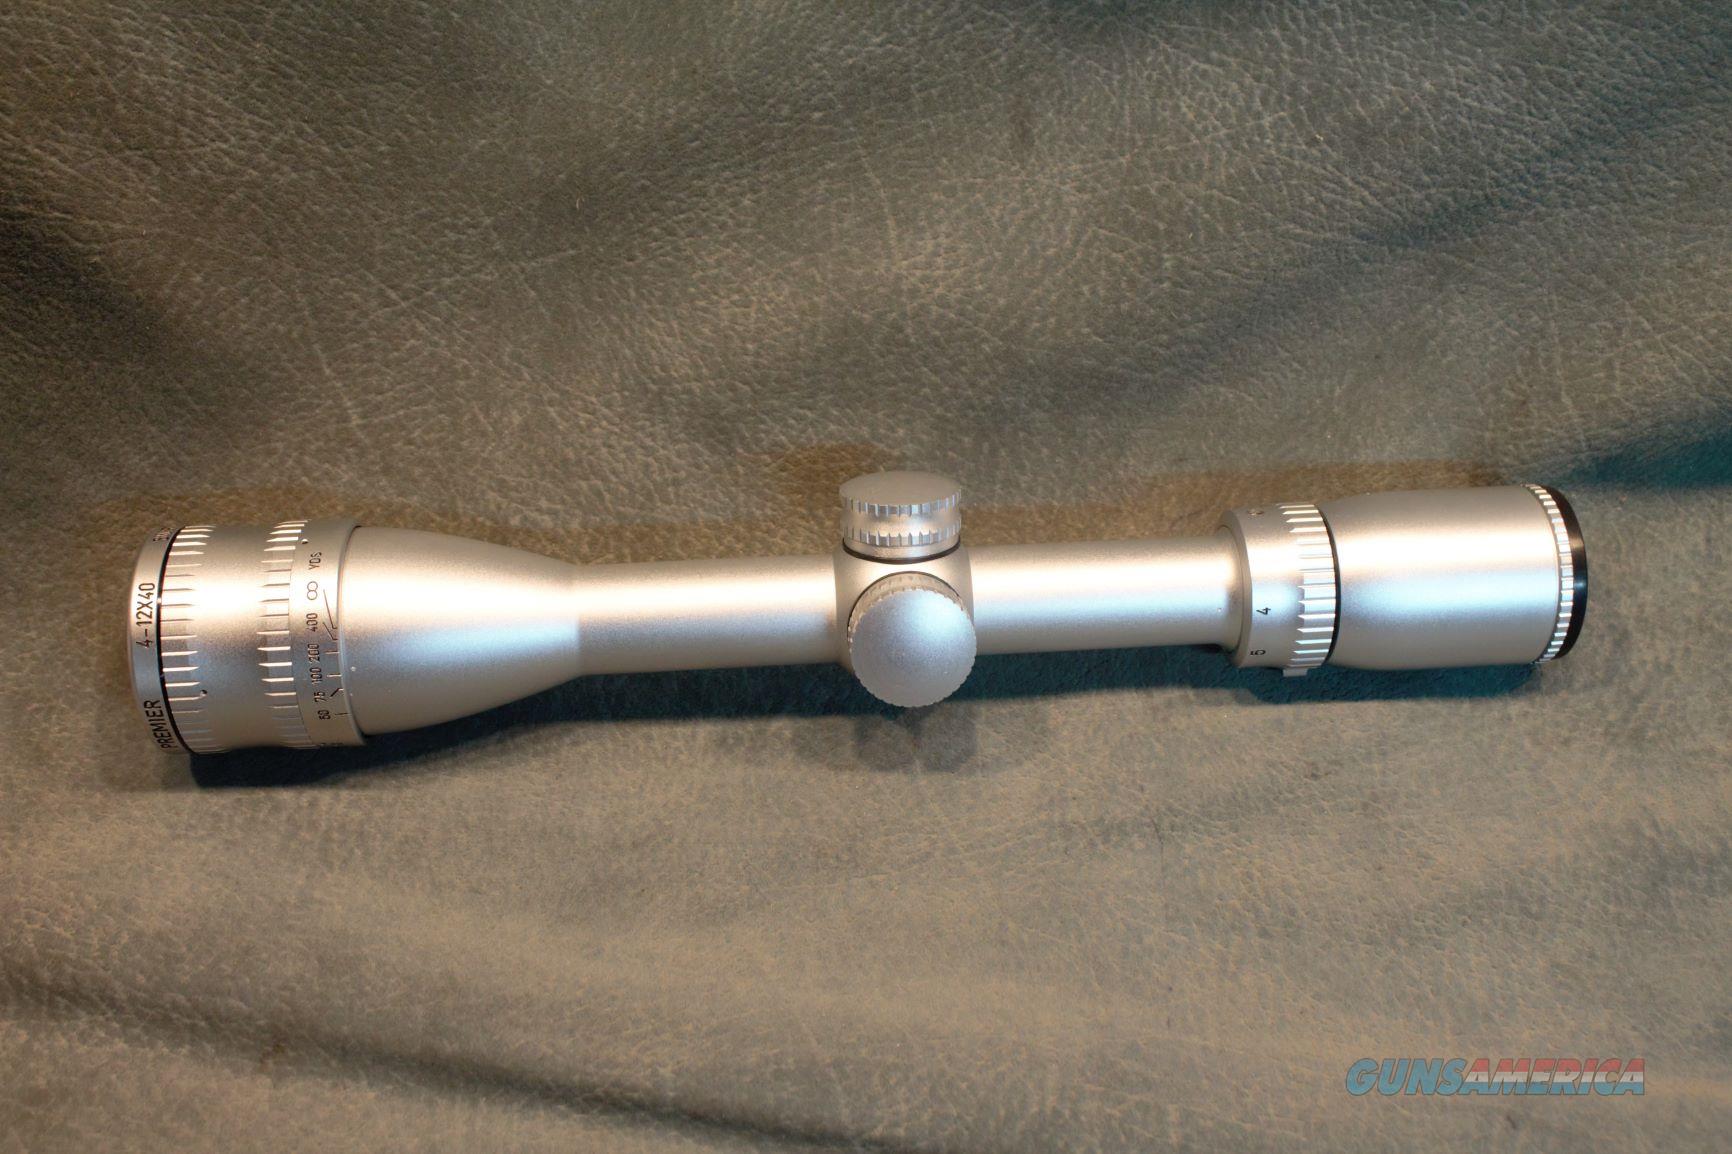 Swift 4 12x40mm Silver Riflescope For Sale At 956692624 5986